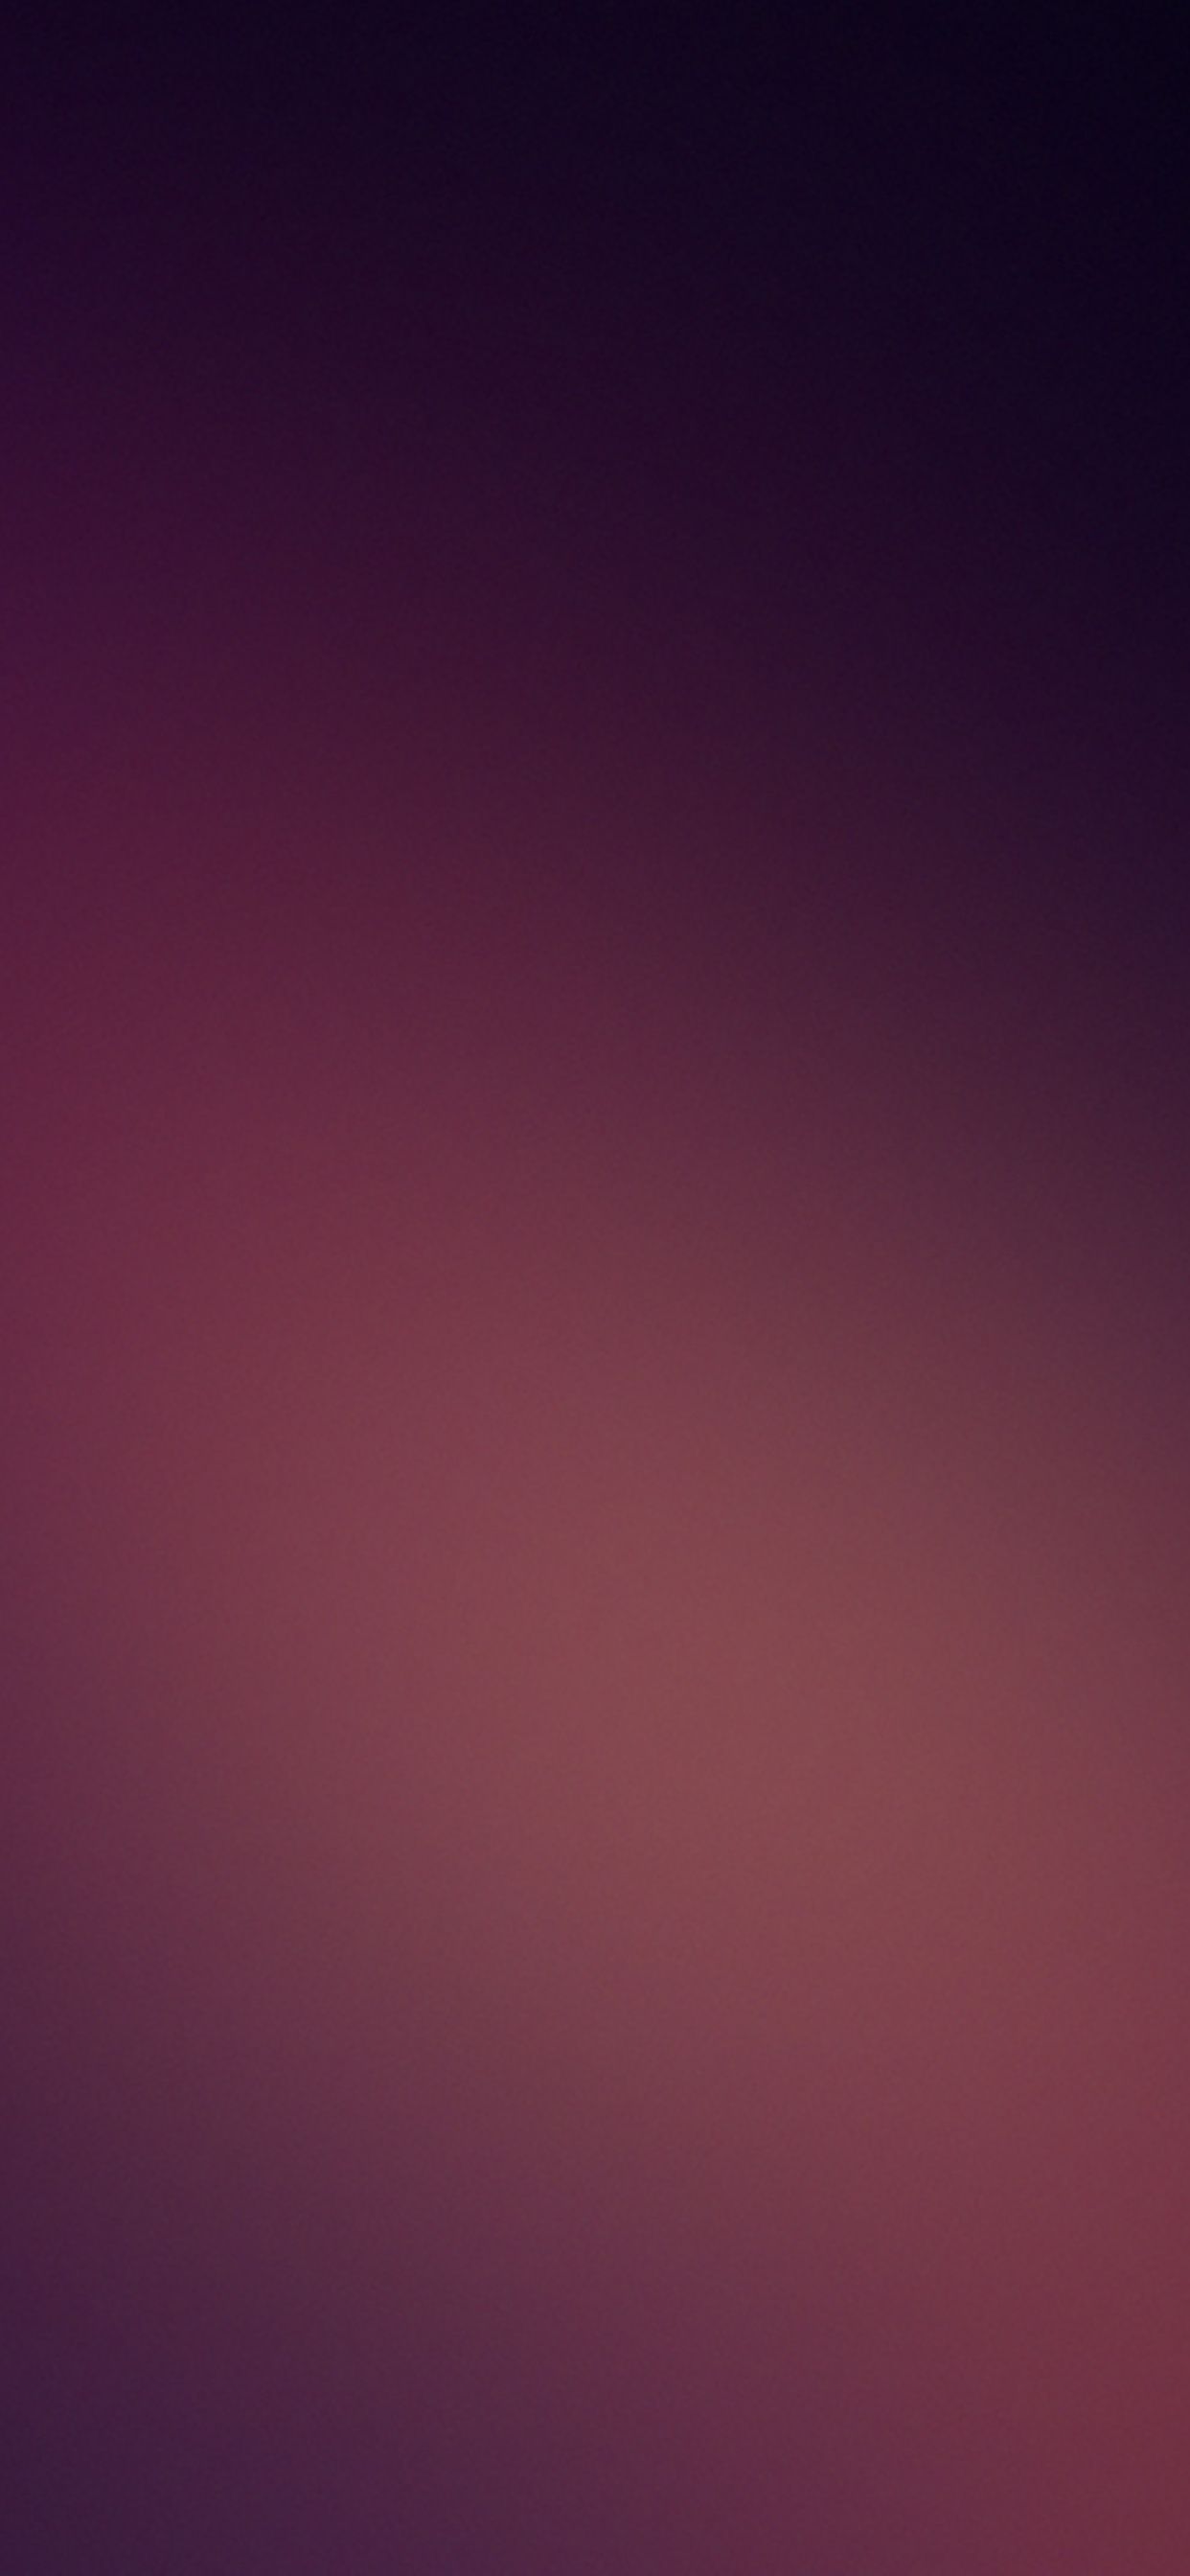 1242x2688 Dark Minimalist Blur 4k Iphone XS MAX HD 4k Wallpapers, Image, Backgrounds, Photos and Pictures